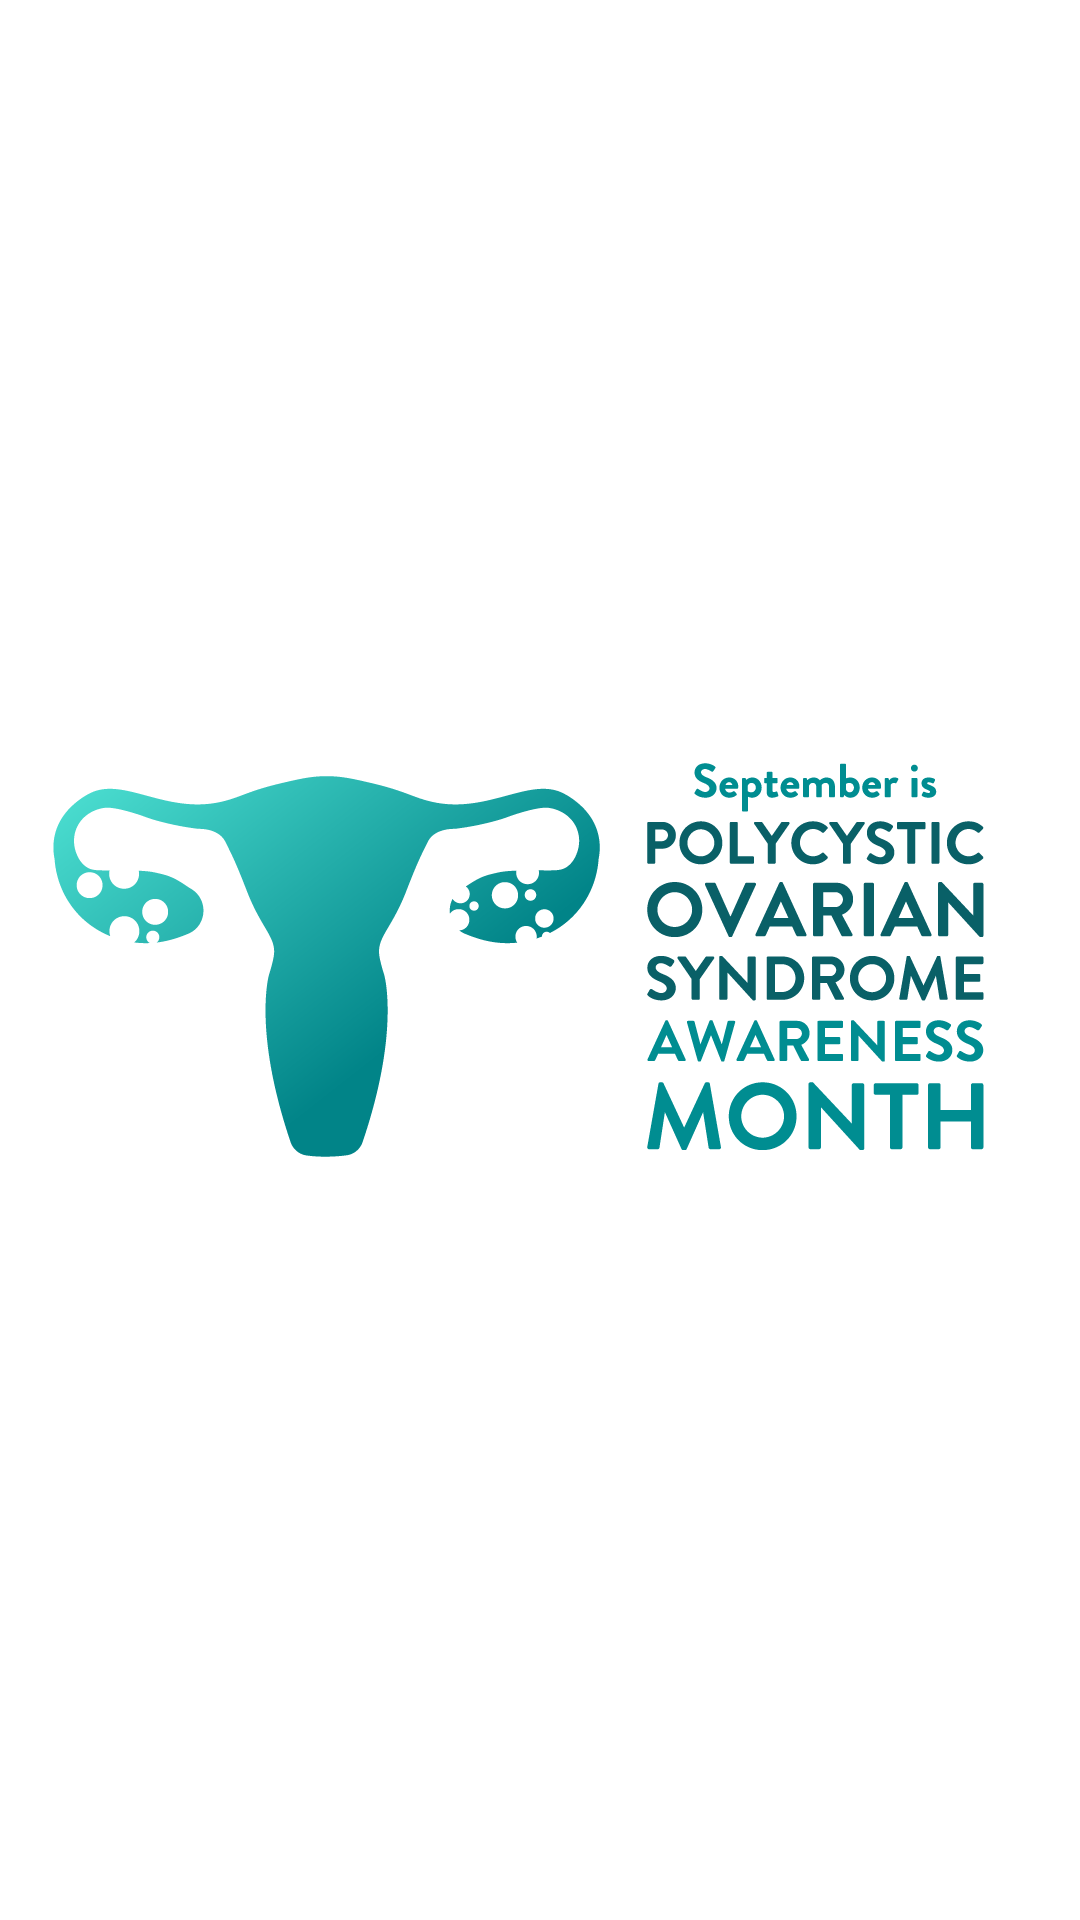 Polycystic Ovarian Syndrome: Can Keto Help?